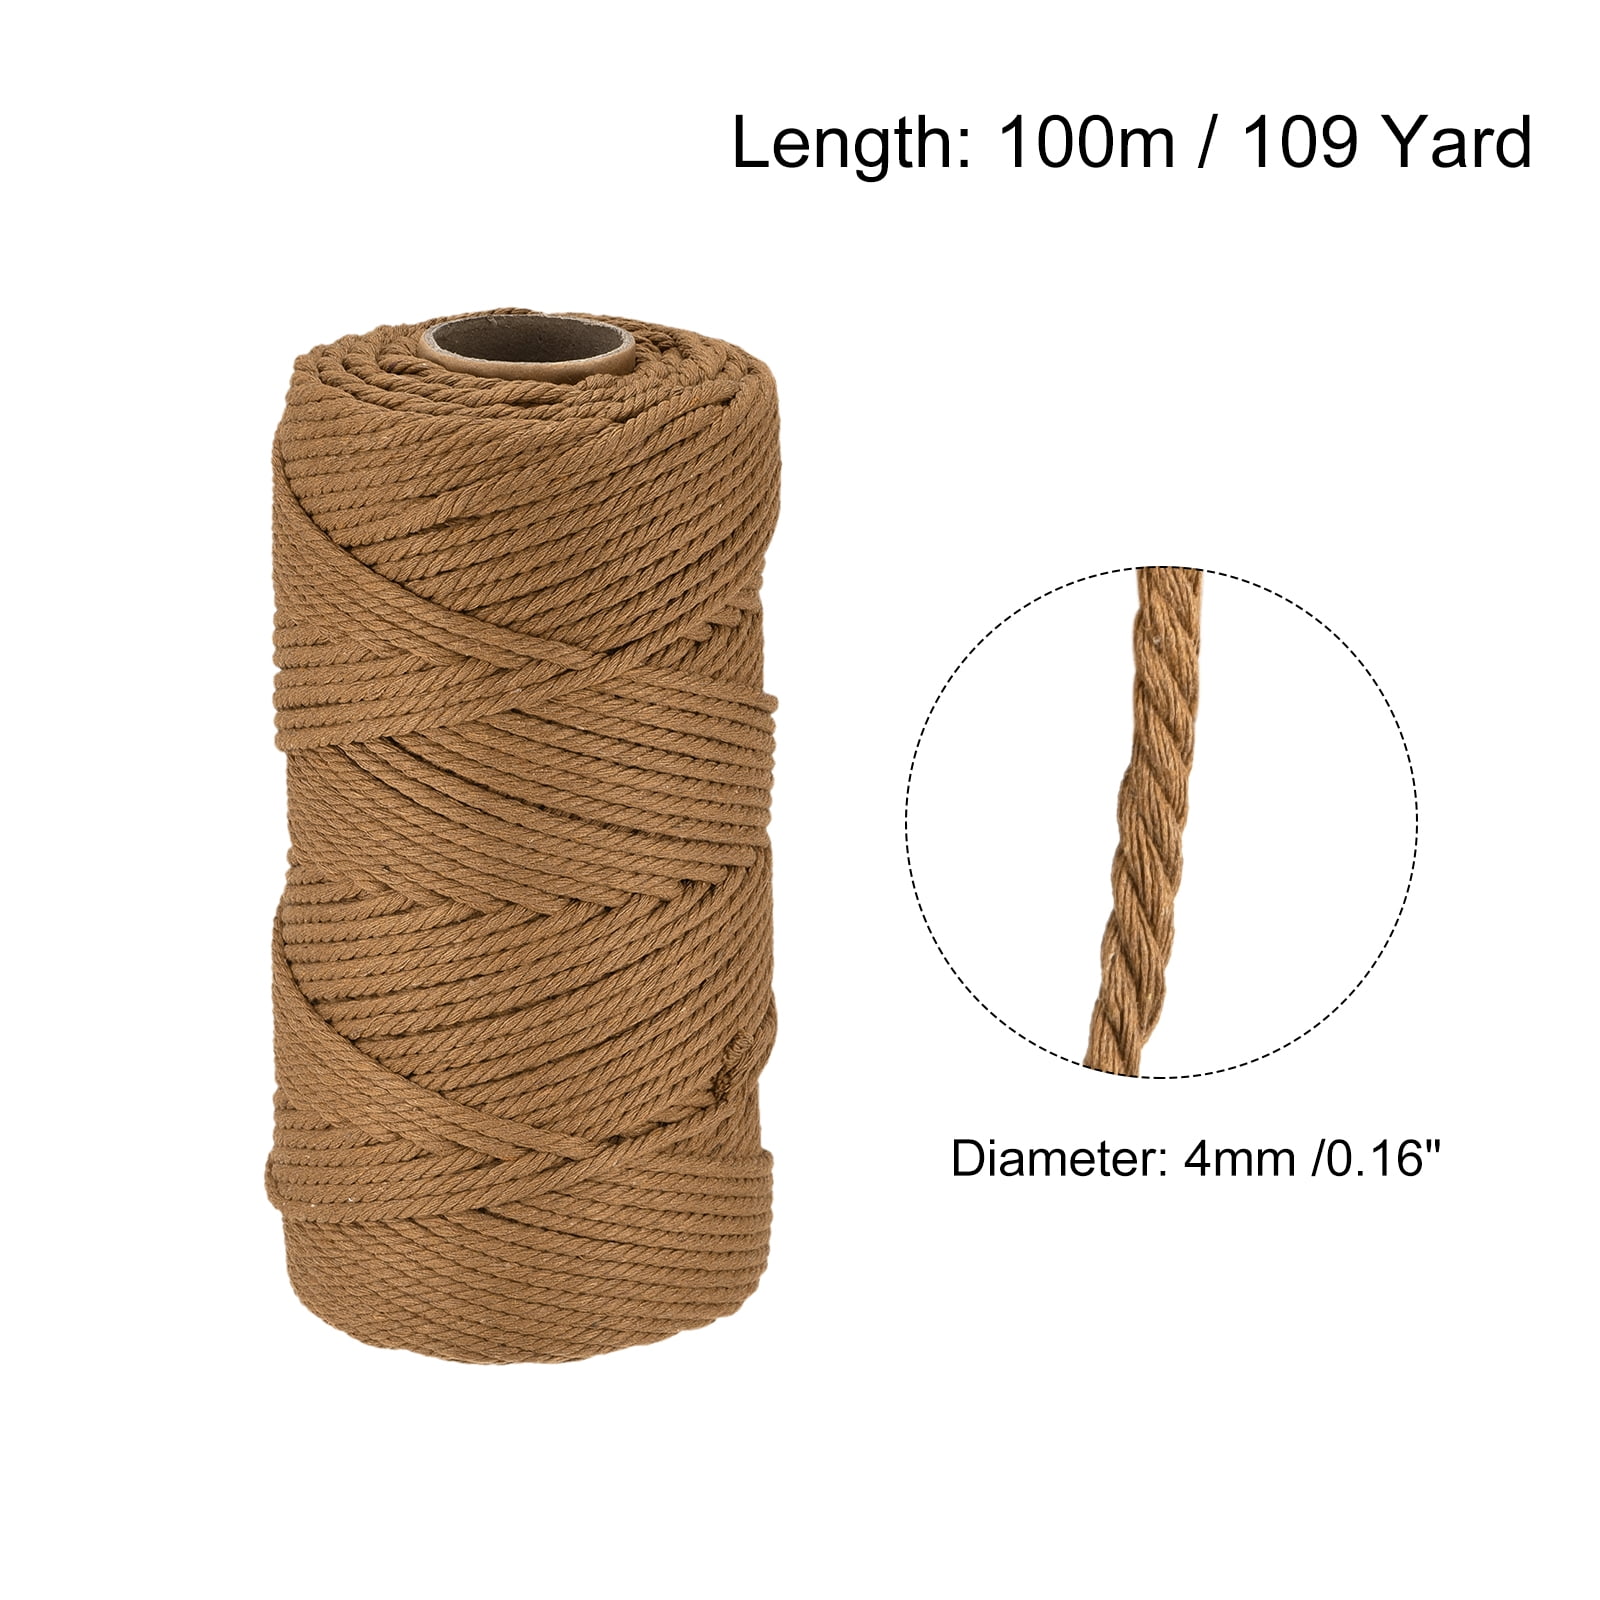 Twine for Crafts 100m Long/100Yard Pure Cotton Twisted Cord Rope Crafts Macrame String String for Crafts, Women's, Size: 3.94*3.94*1.57, Blue